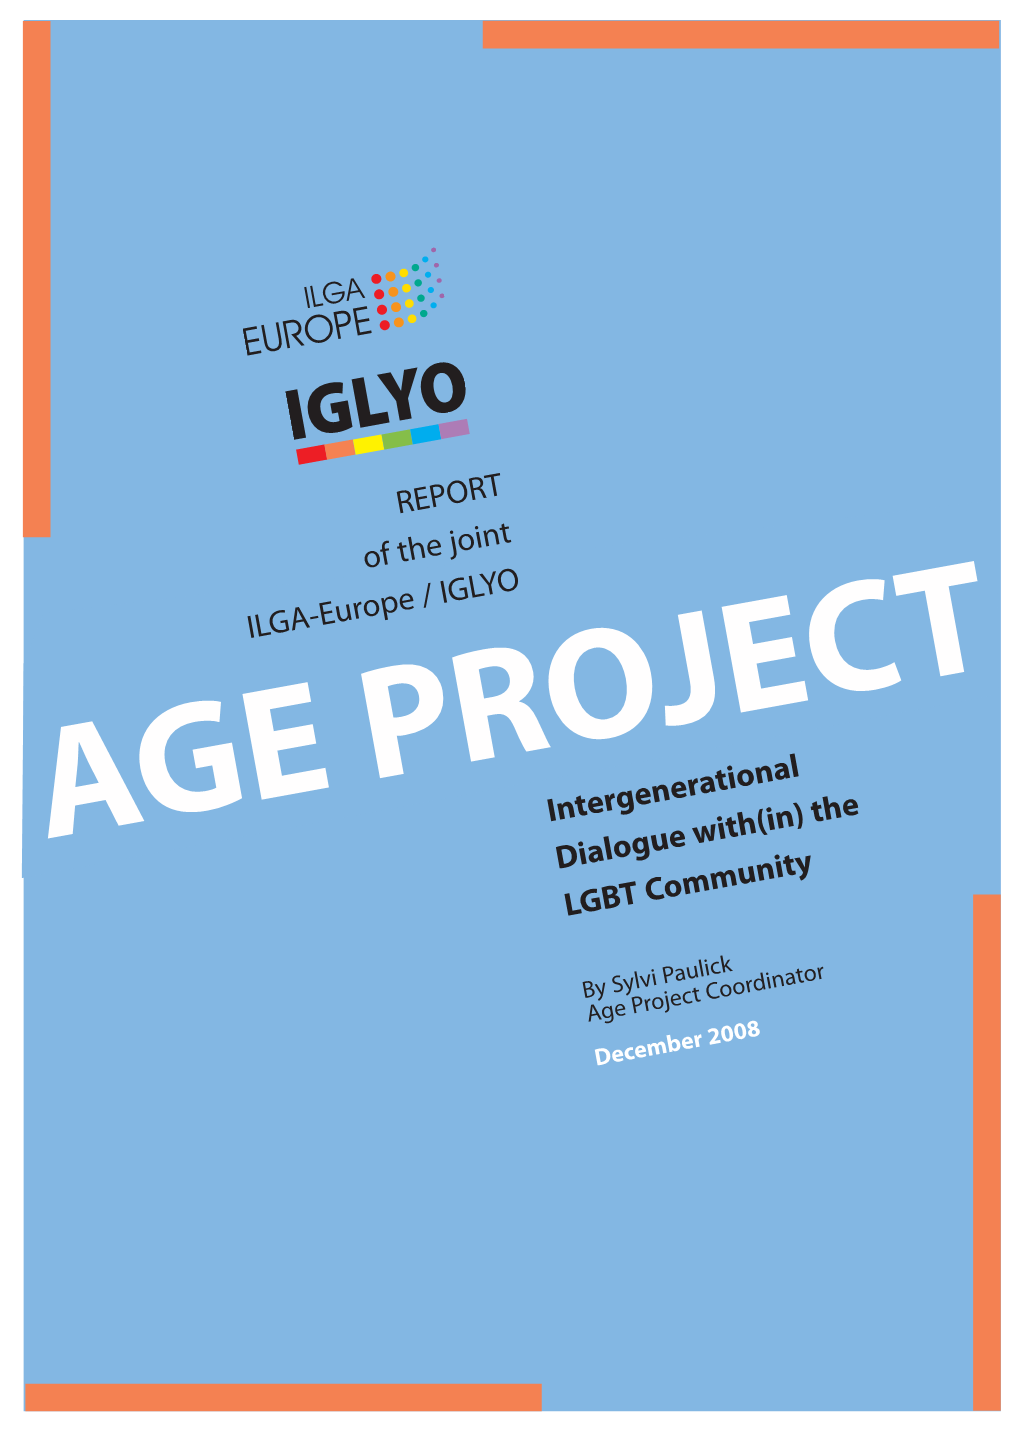 The LGBT Community REPORT of the Joint ILGA-Europe / IGLYO